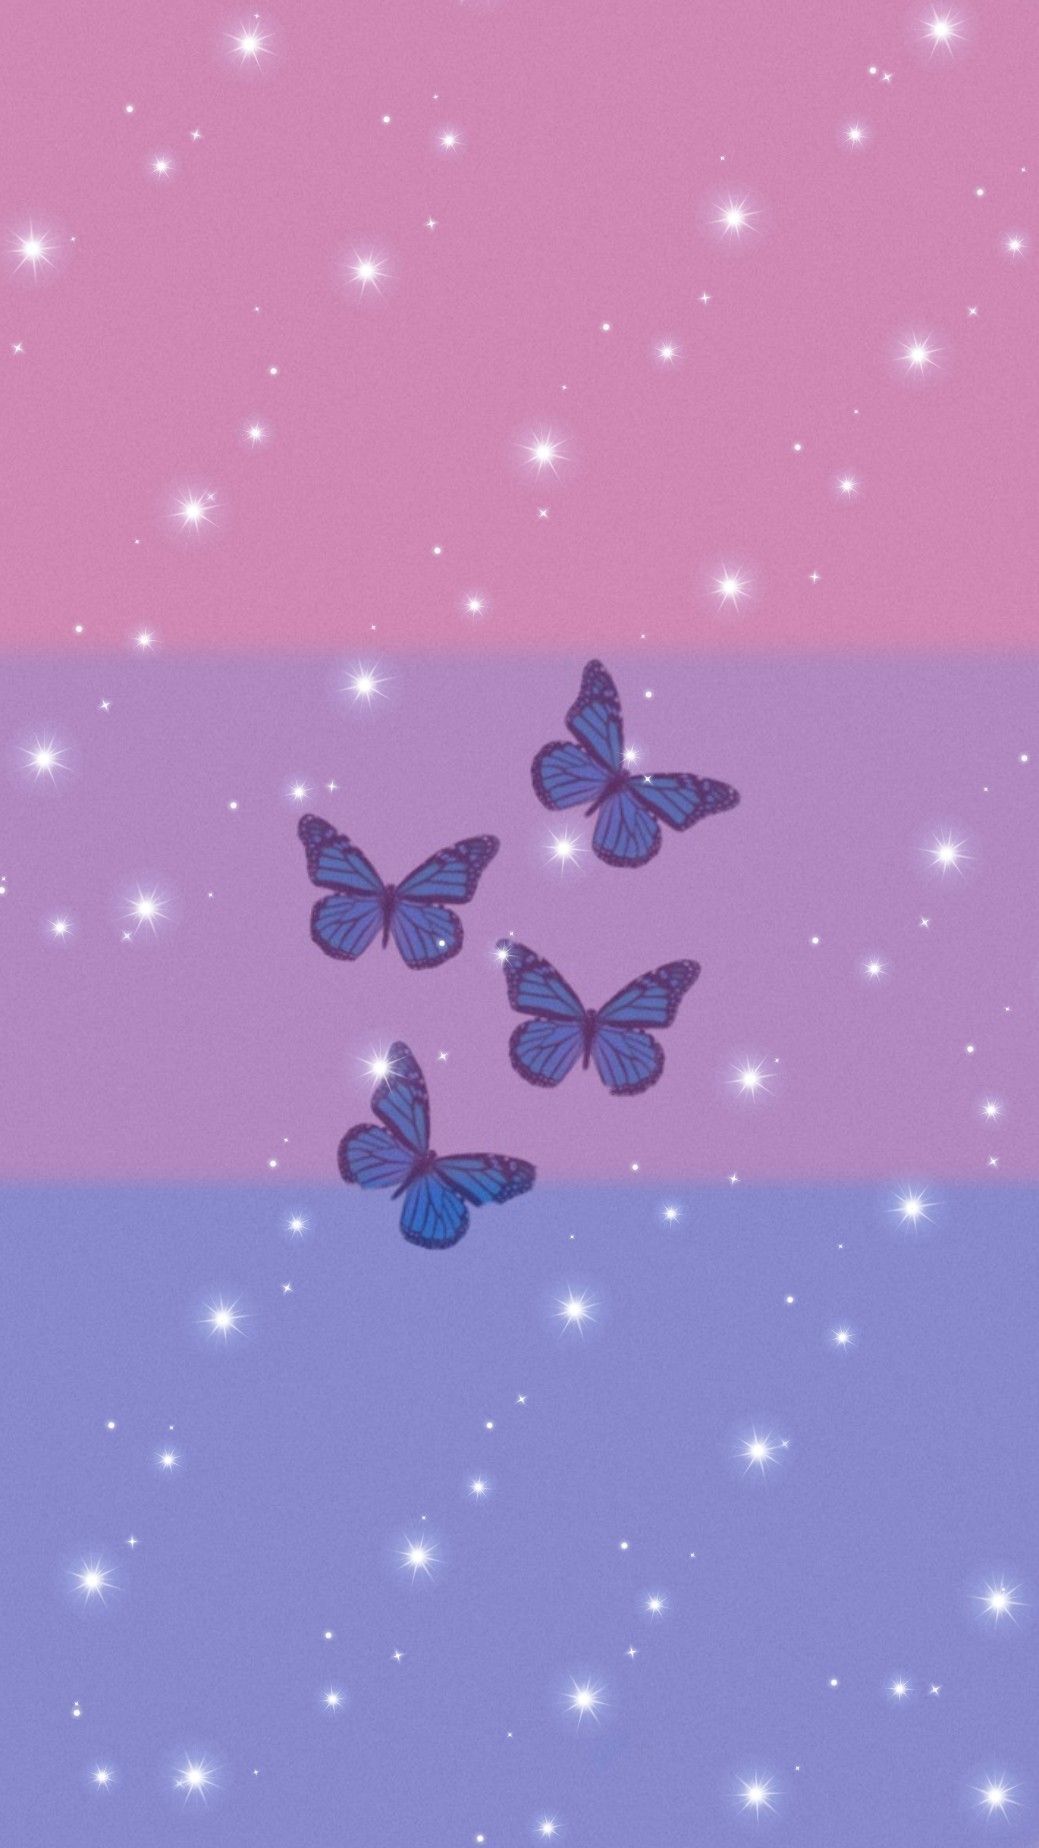 A picture of some butterflies flying in the sky - Bisexual